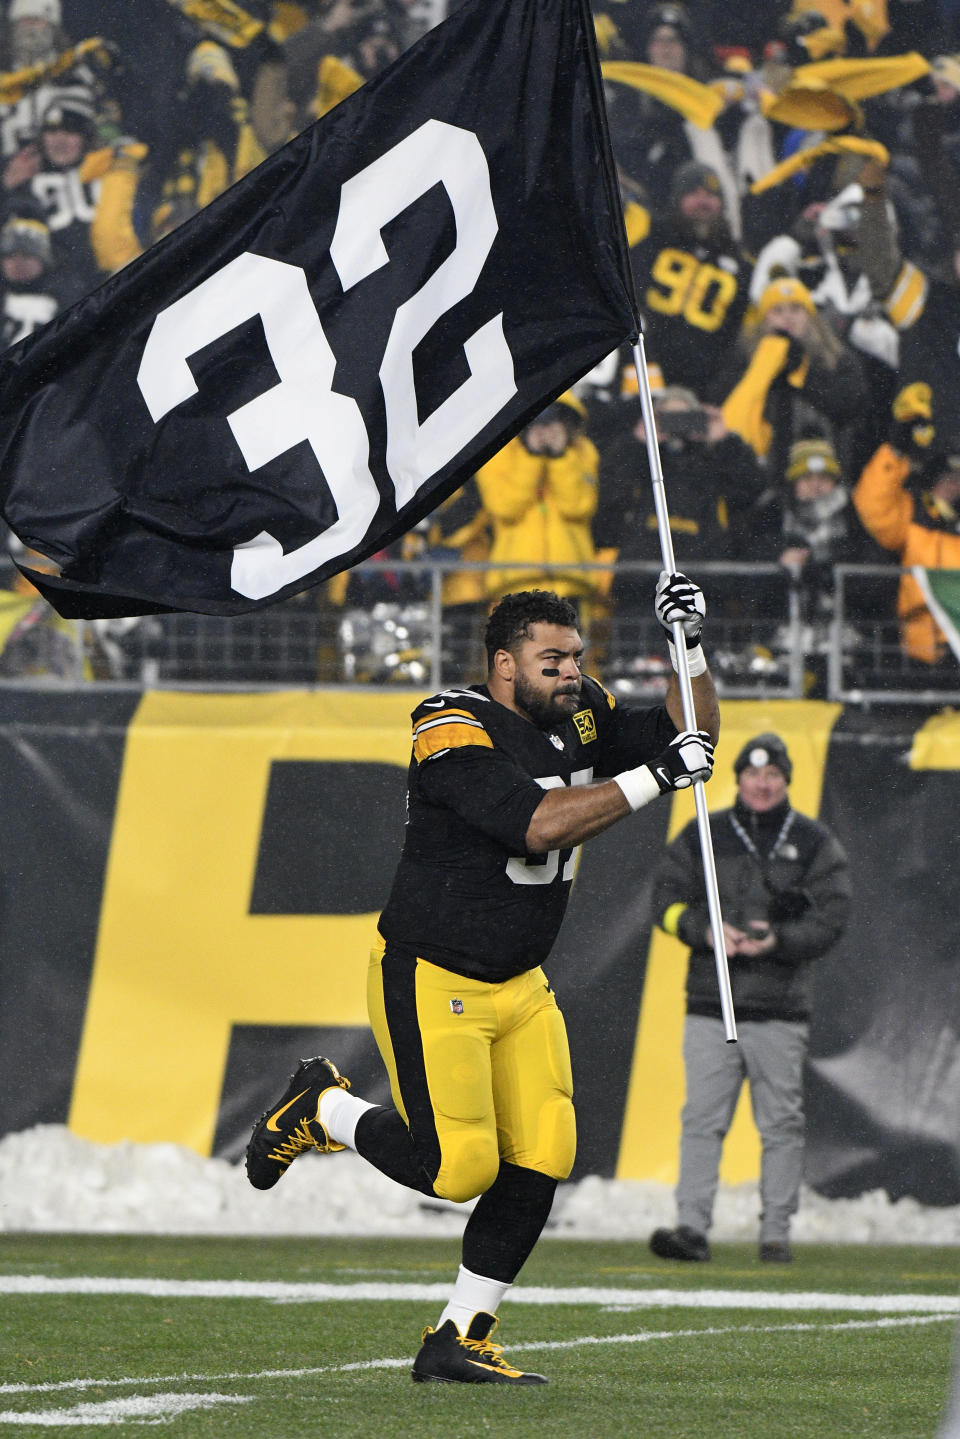 Pittsburgh Steelers defensive tackle Cameron Heyward (97) is introduced before an NFL football game against the Las Vegas Raiders in Pittsburgh, Saturday, Dec. 24, 2022. (AP Photo/Don Wright)